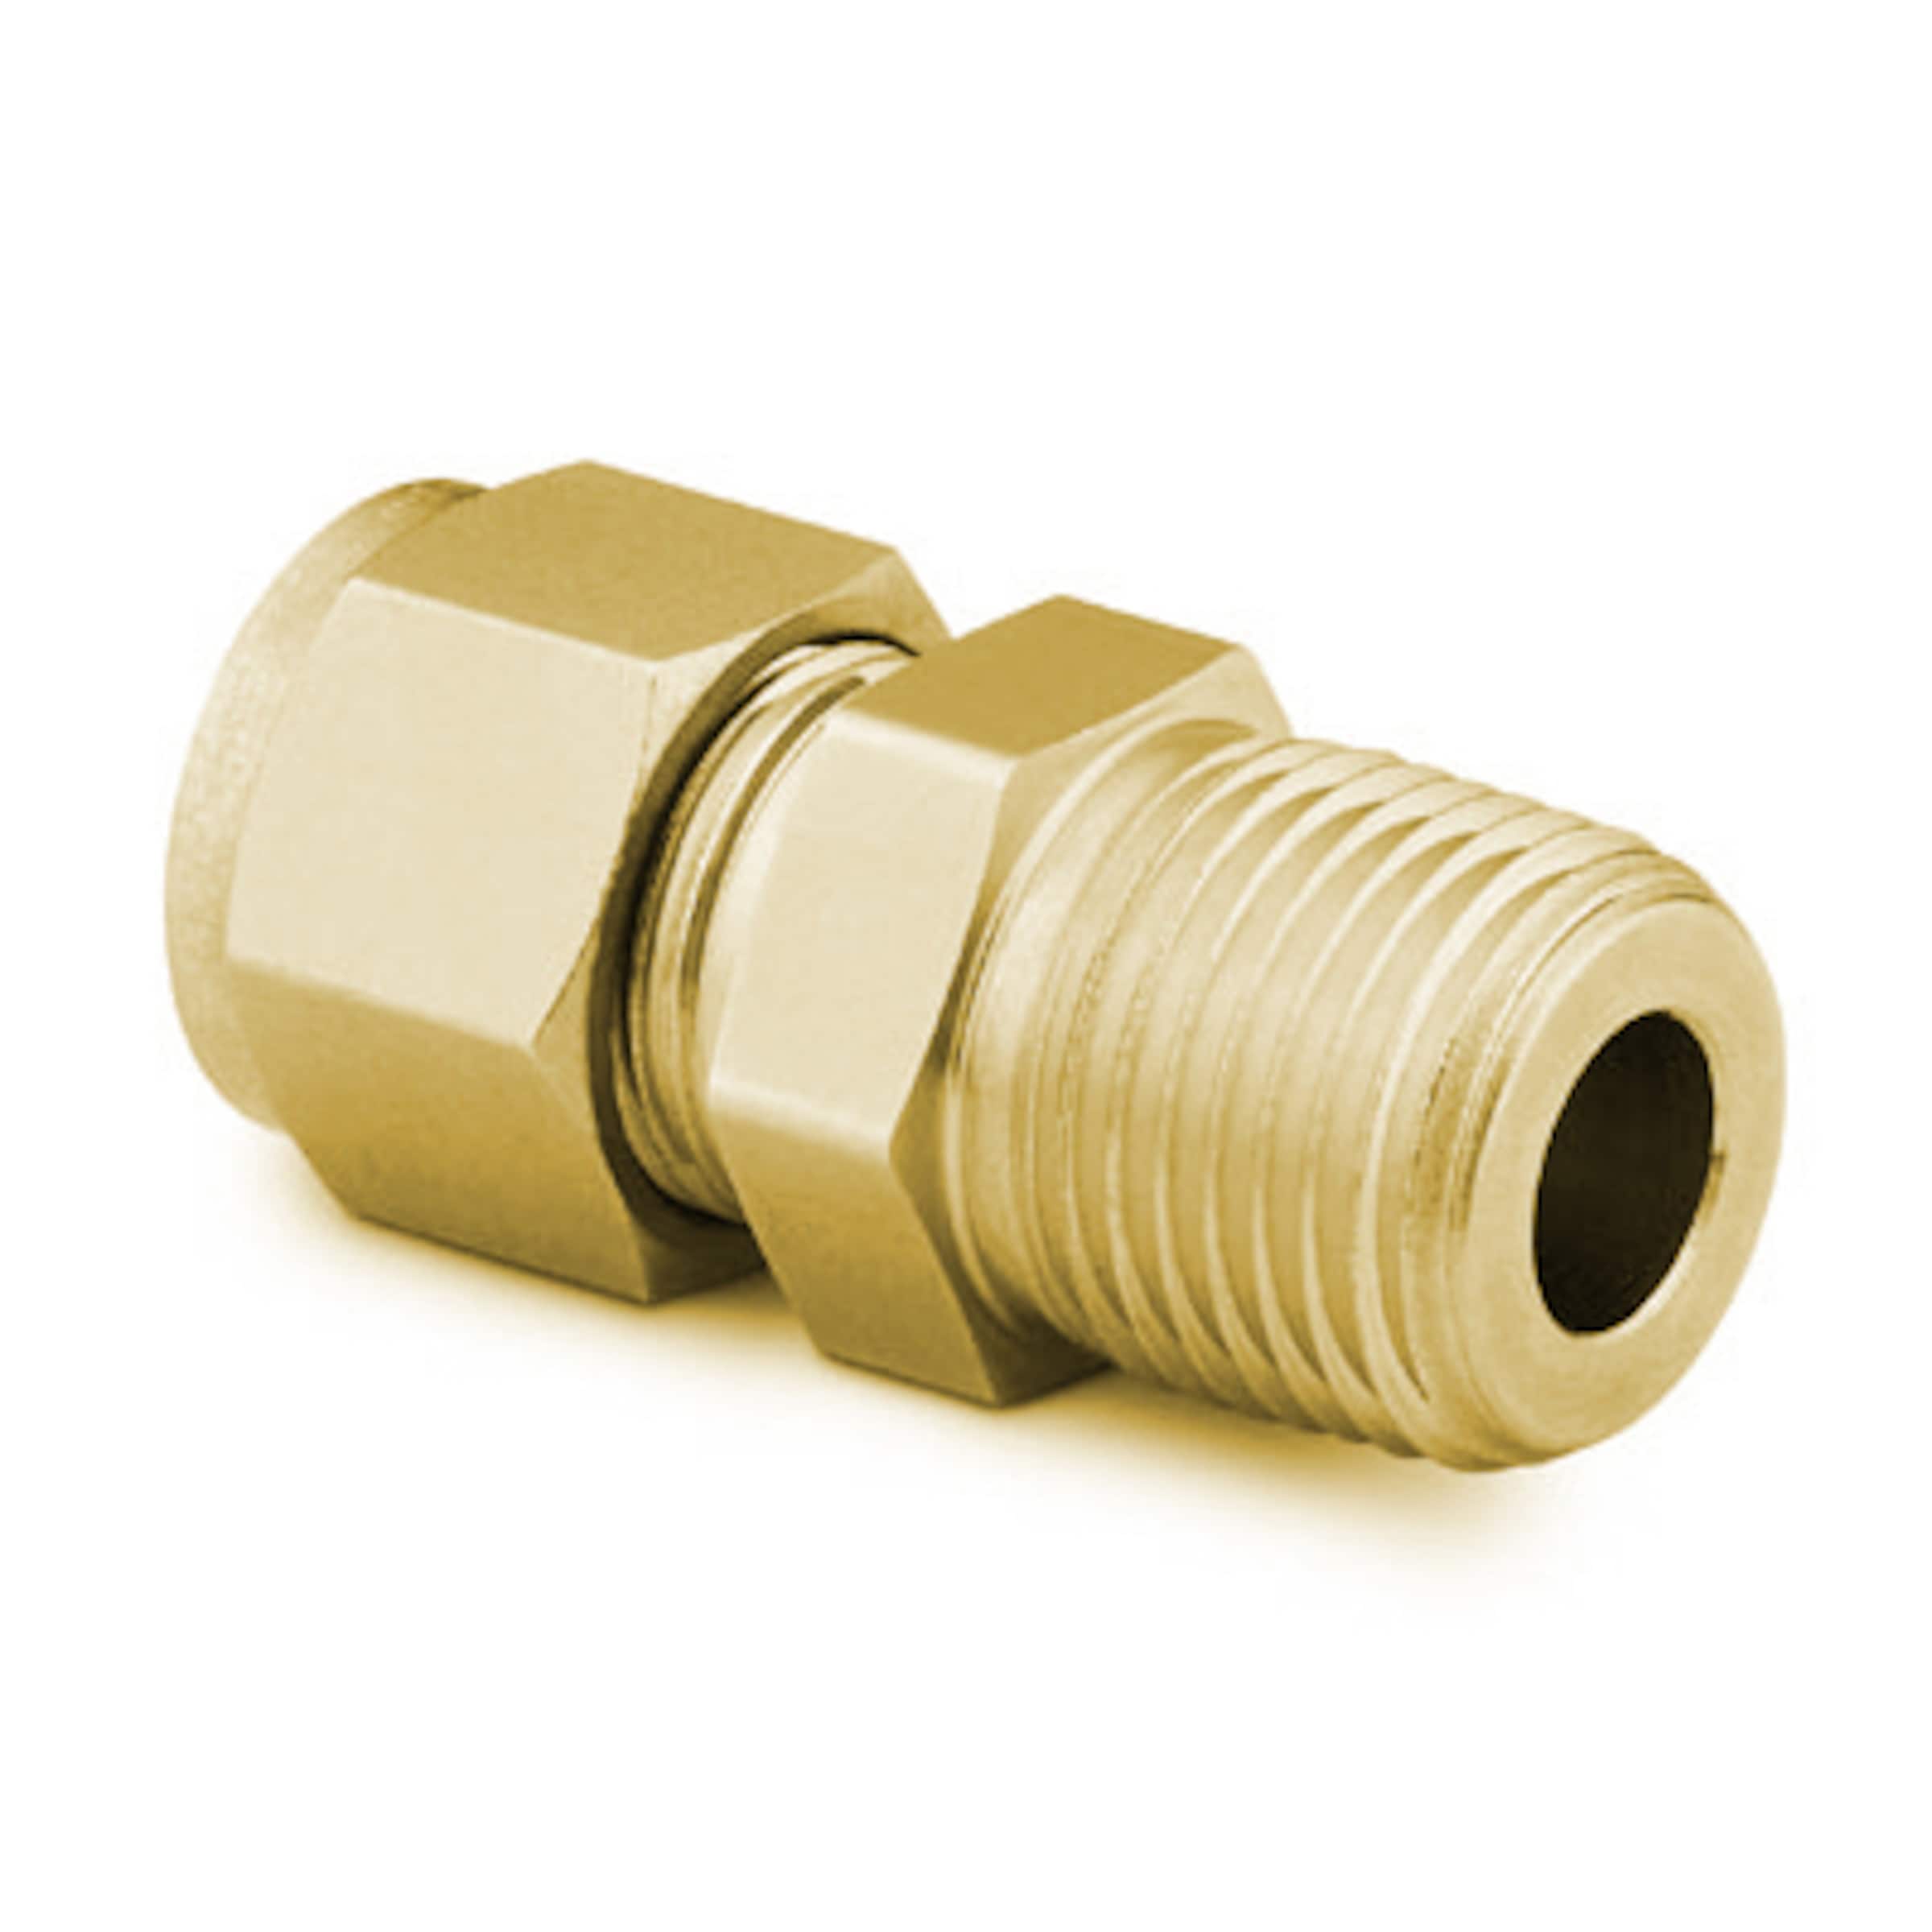 Brass Swagelok Tube Fitting, Male Connector, 5/8 in. Tube OD x 1/2 in. Male  NPT, Male Connectors, Tube Fittings and Adapters, Fittings, All  Products